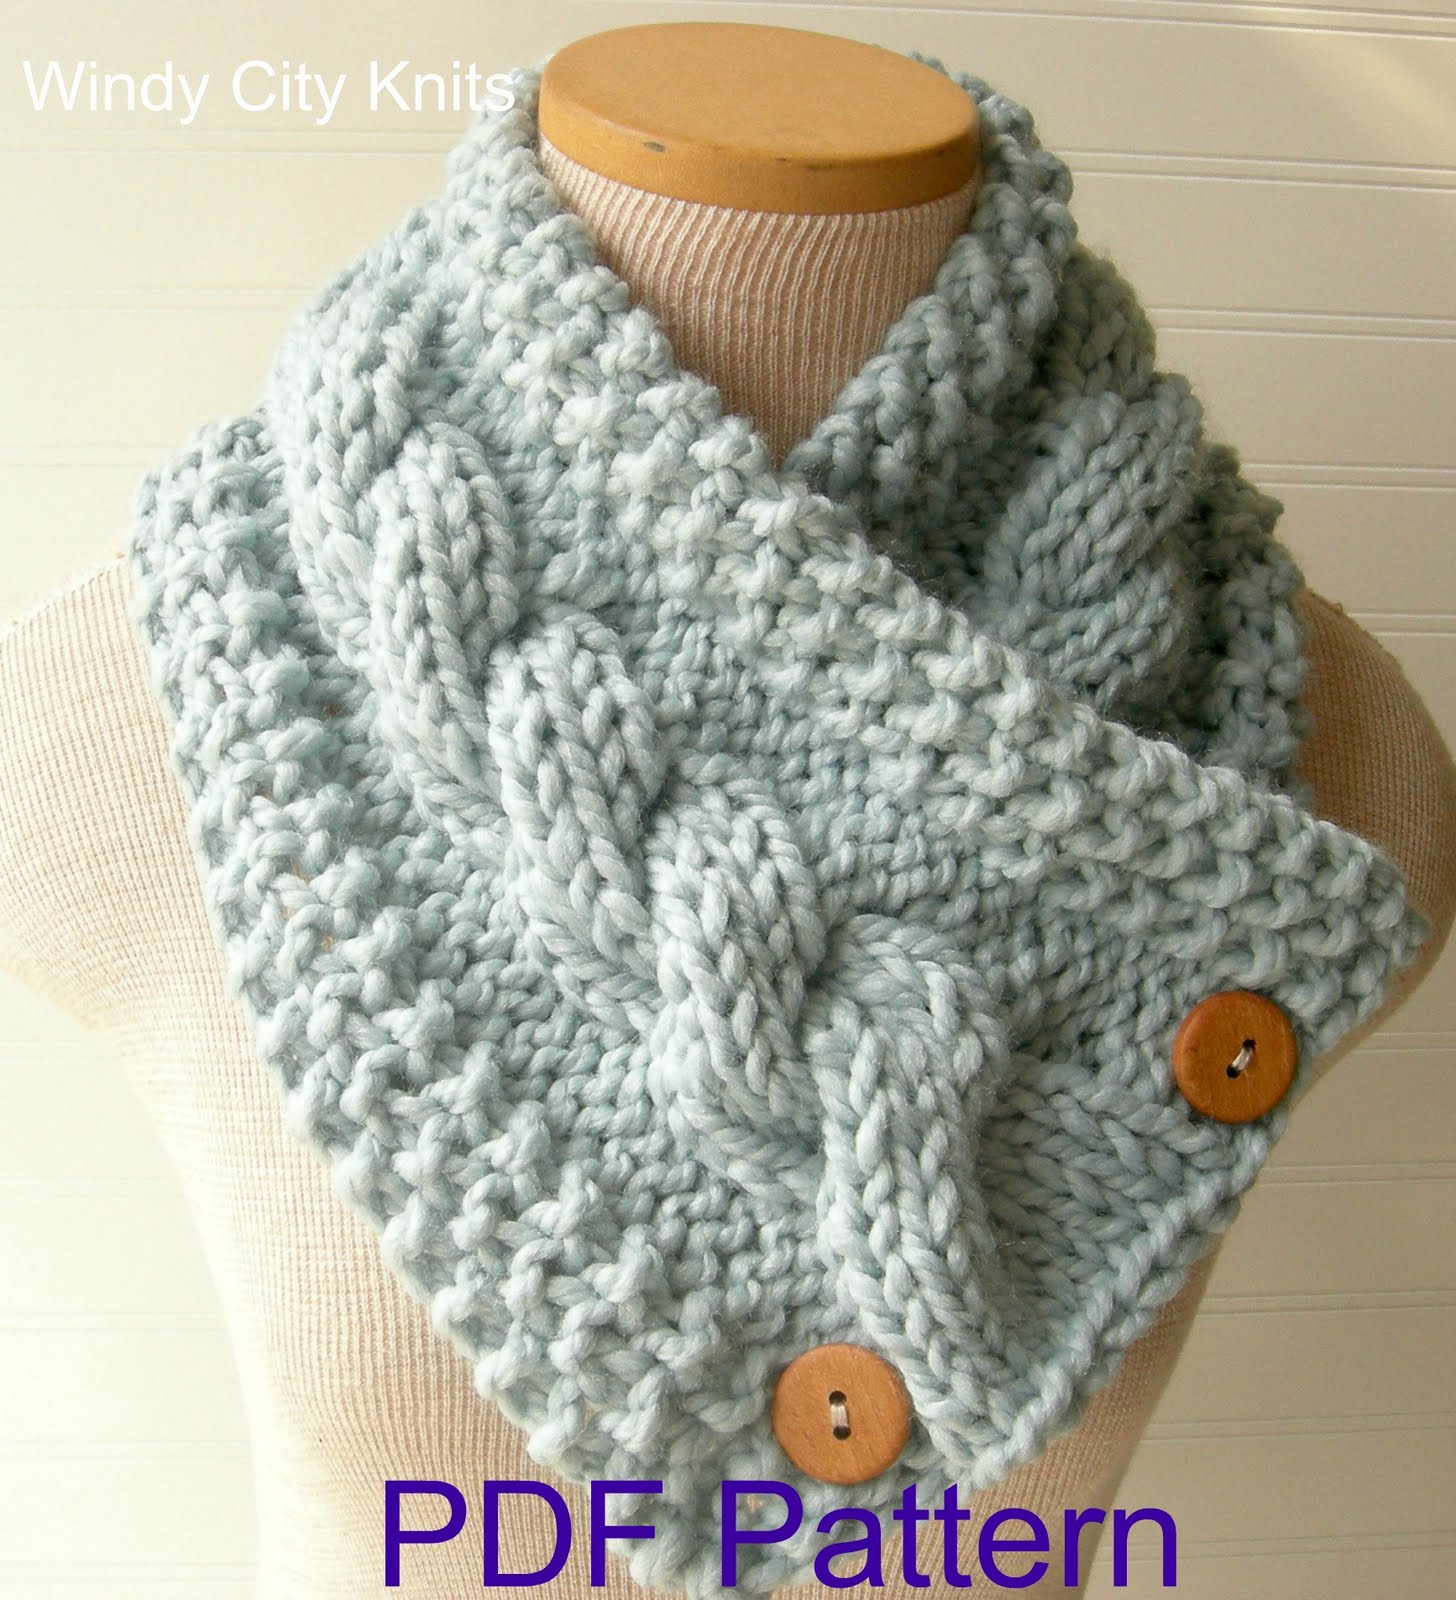 Cable Knitted Scarf Pattern Windycityknits Knit Cable Cowl Scarf Pattern Pdf